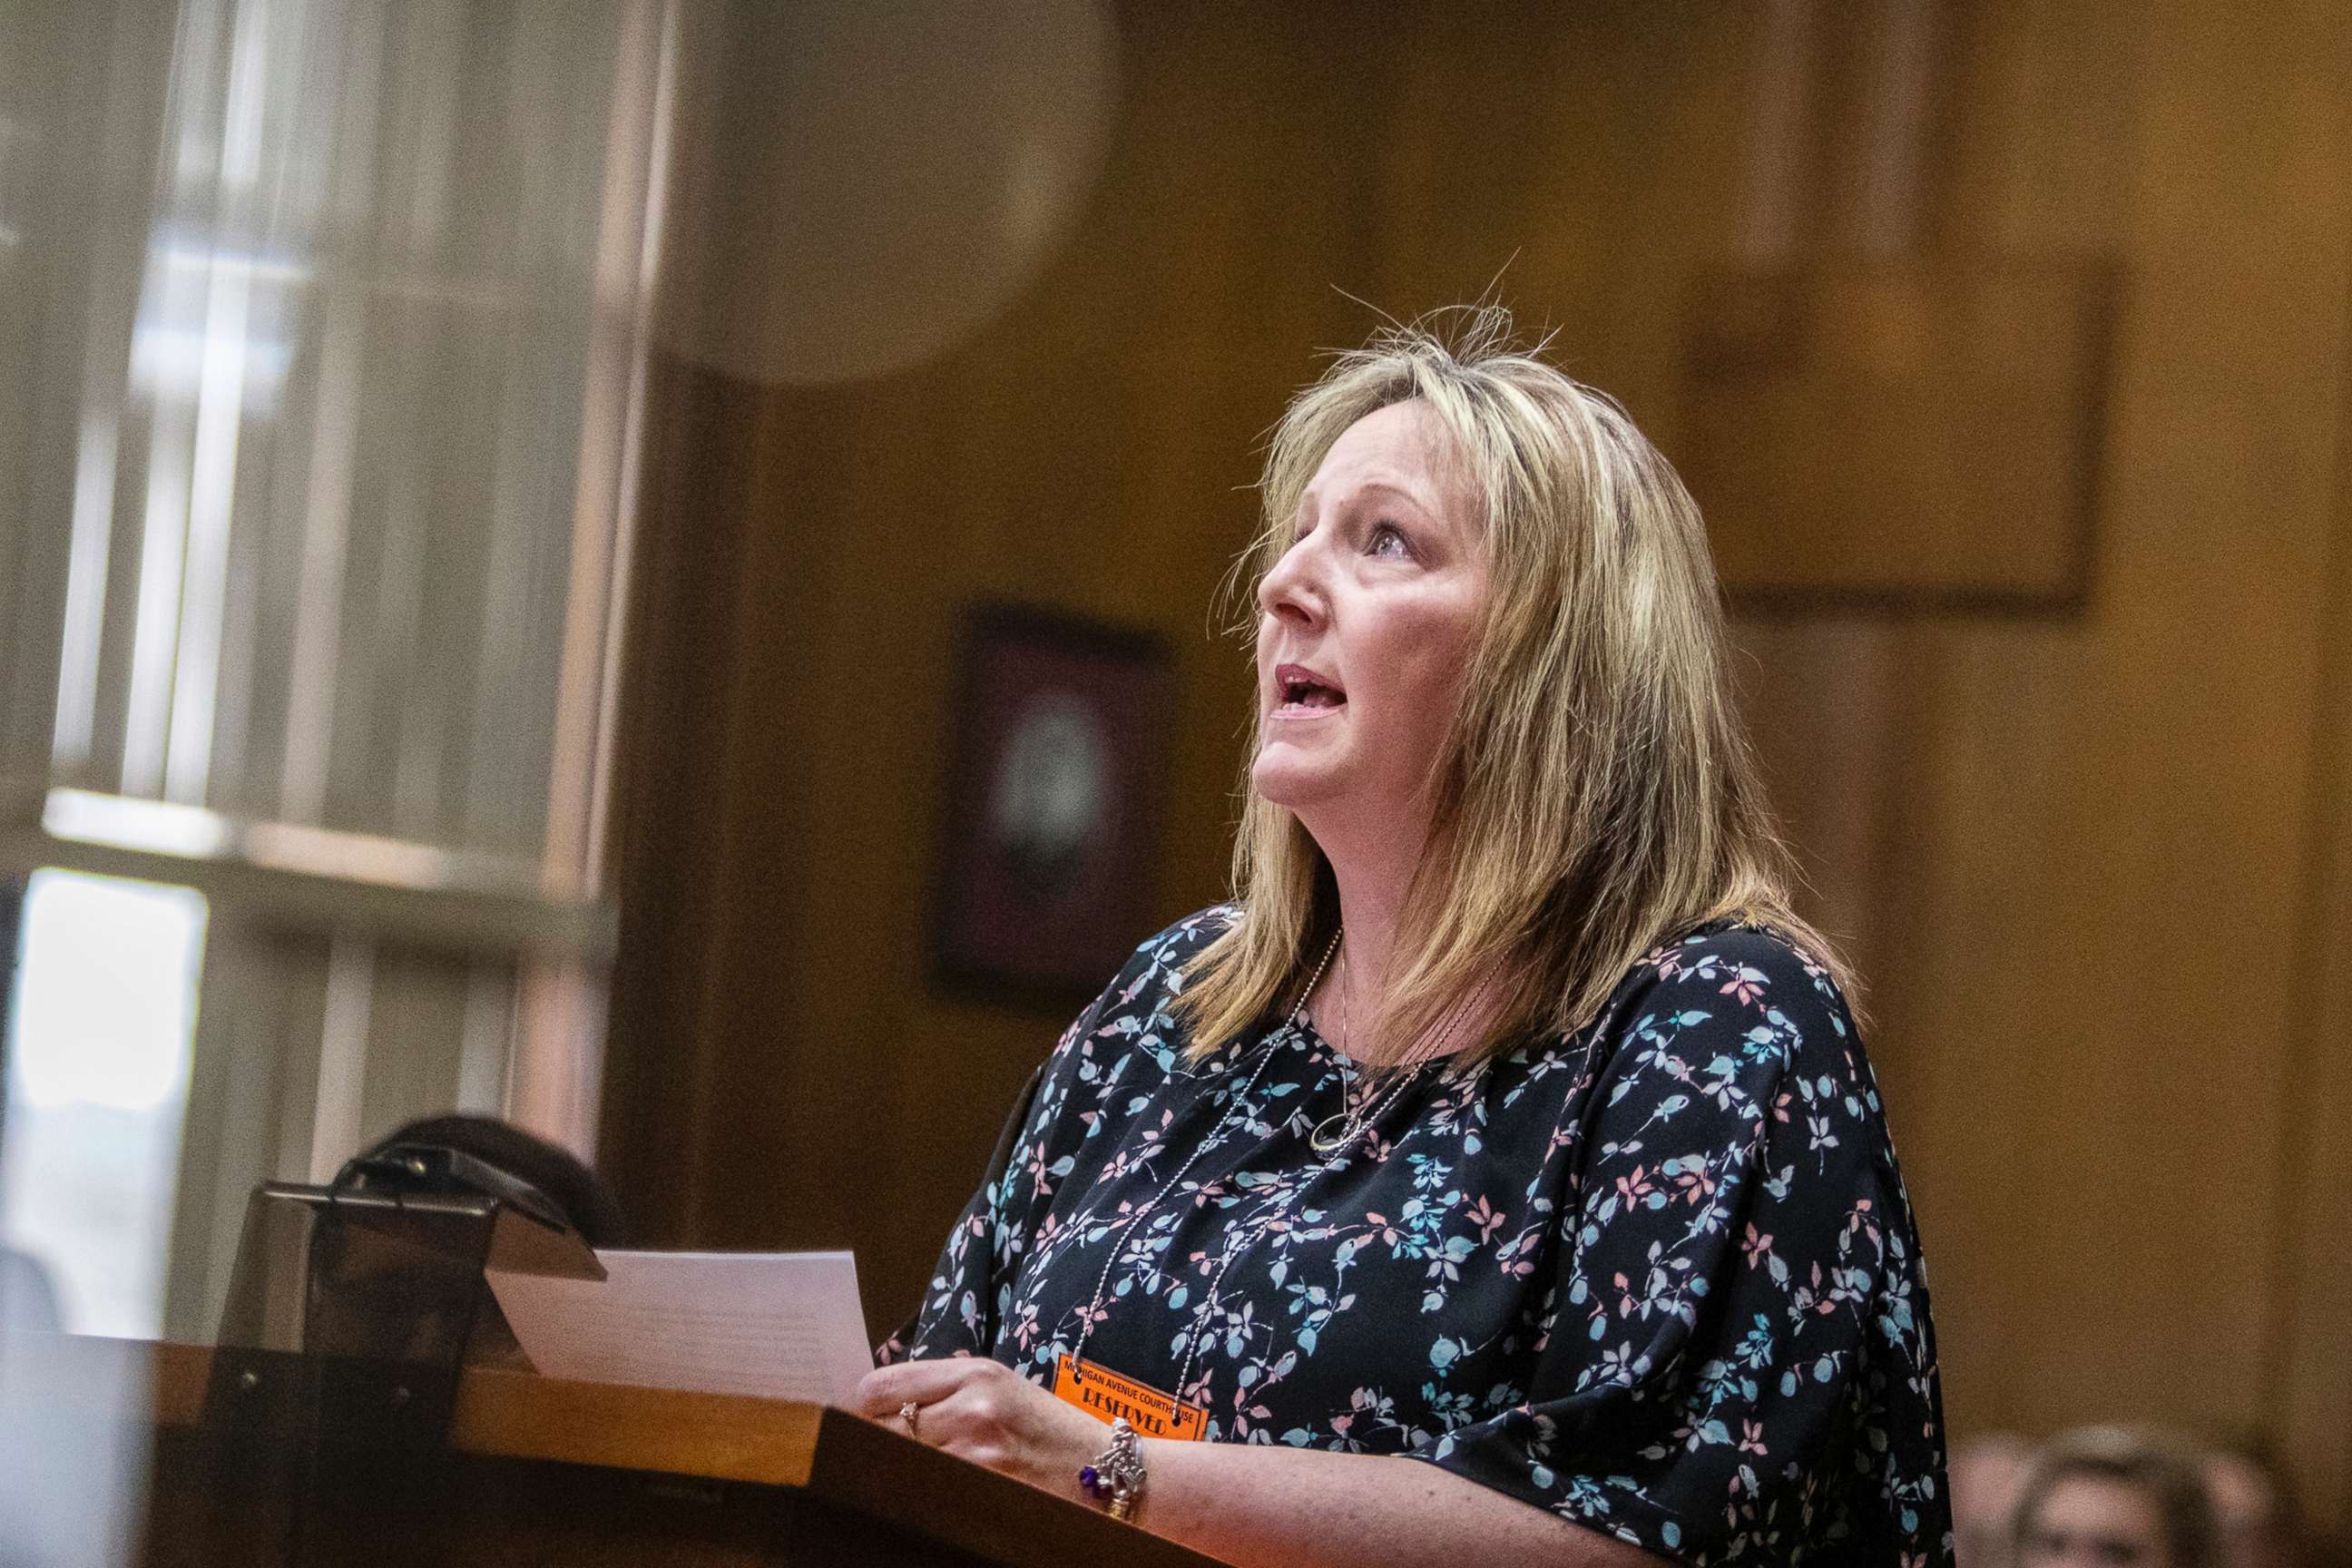 PHOTO: Laurie Smith, whose husband Rich and son Tyler, 17, were killed, addresses Jason Dalton before he was sentenced at the Kalamazoo County Courthouse in Kalamazoo, Mich., Feb. 5, 2019.